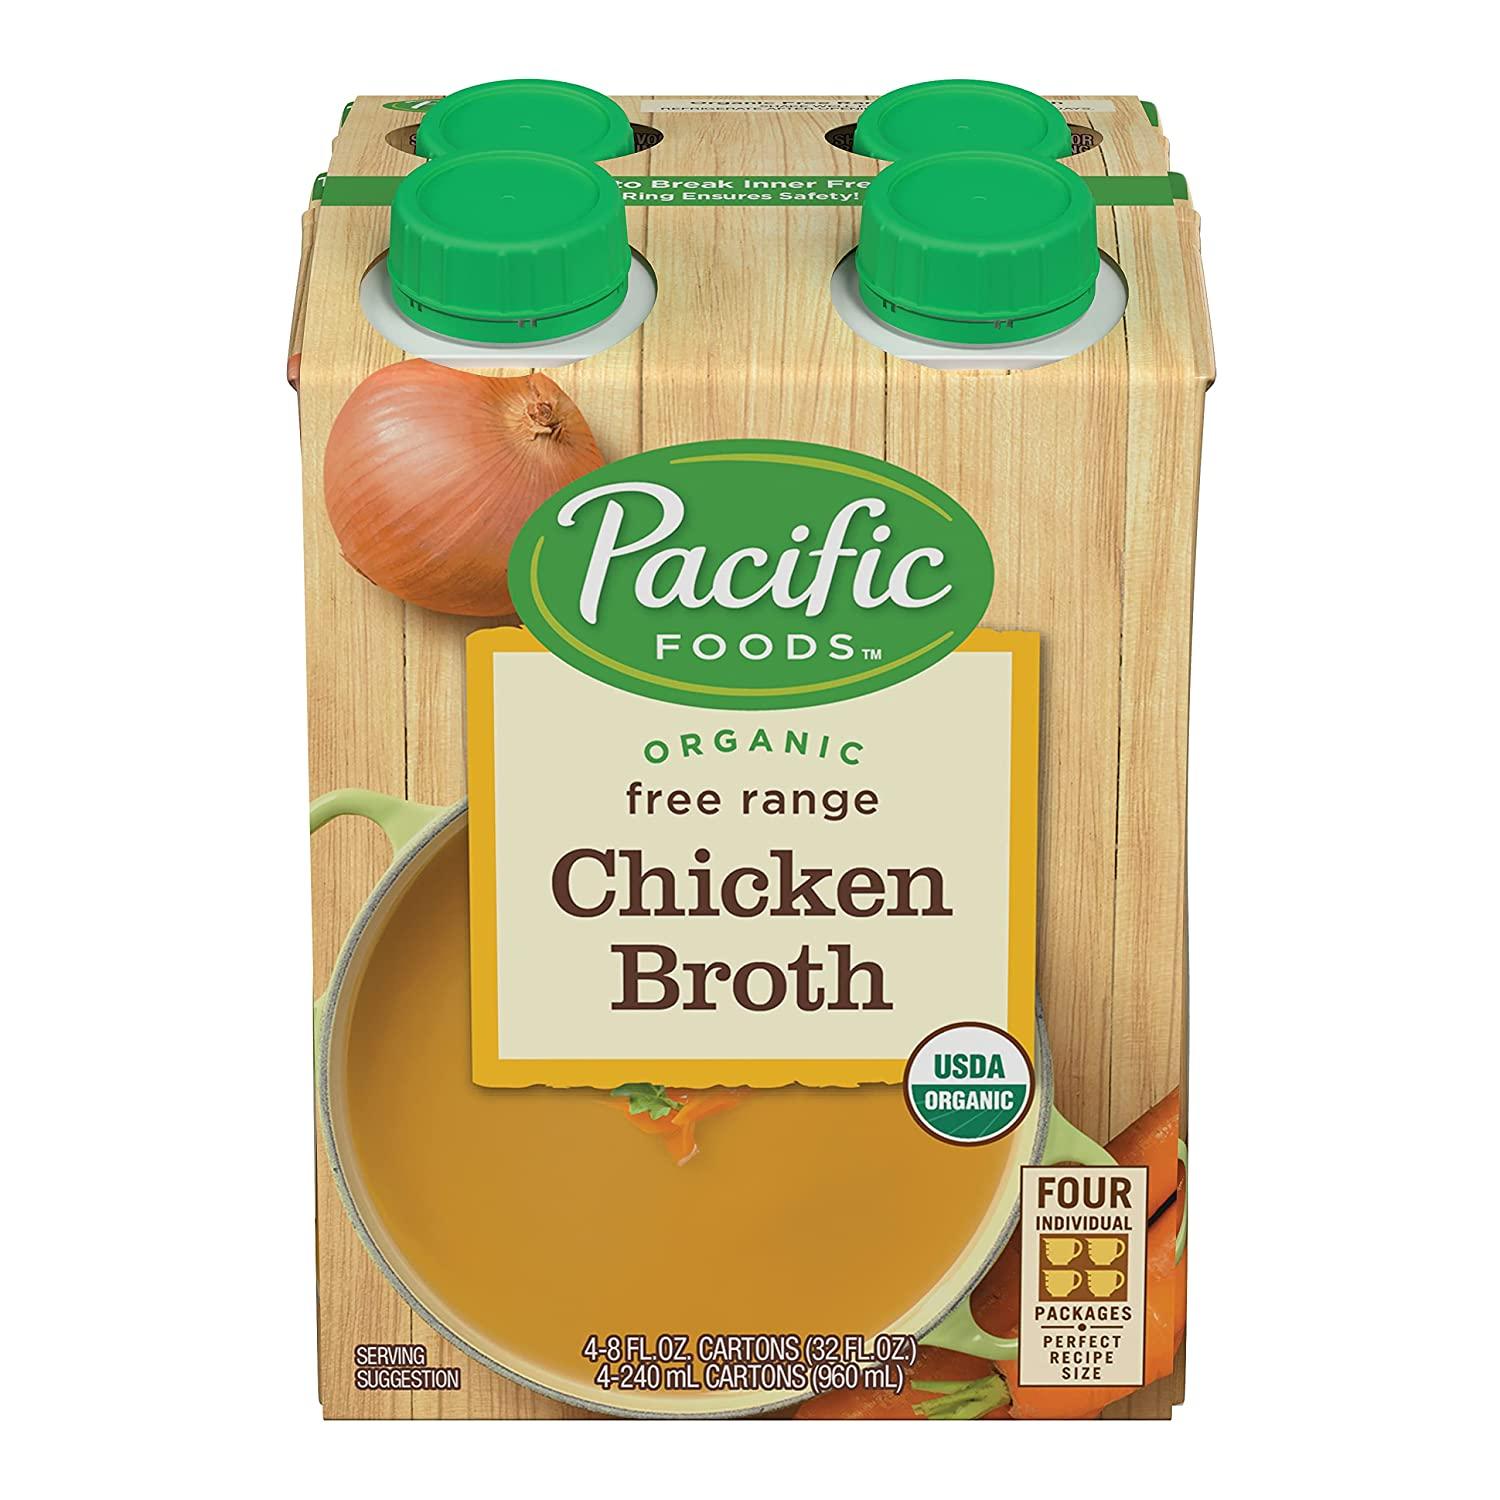 Pacific Foods Organic Chicken Broth 4 Pack for $2.64 Shipped